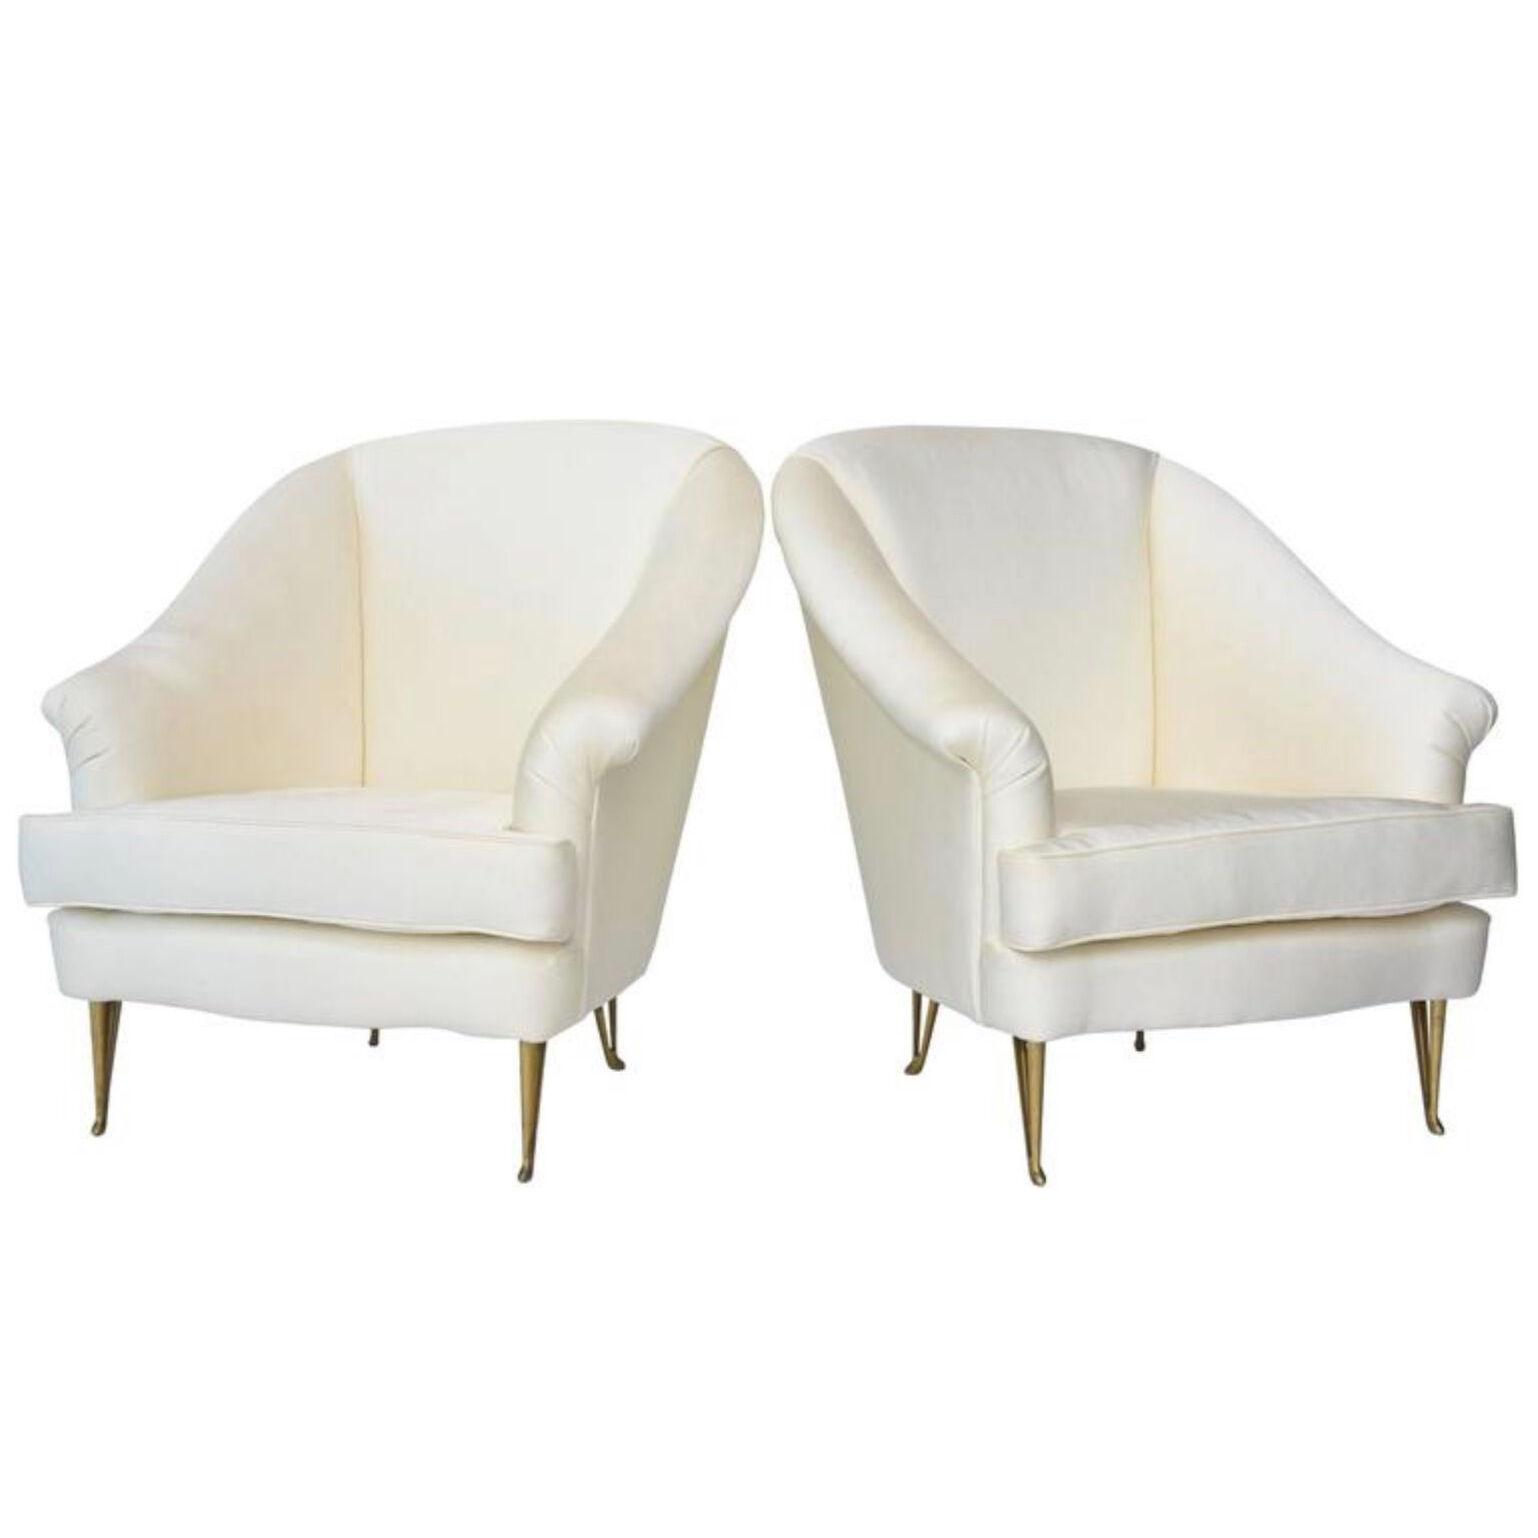 Pair of Italian Modern Club Chairs Made by Isa